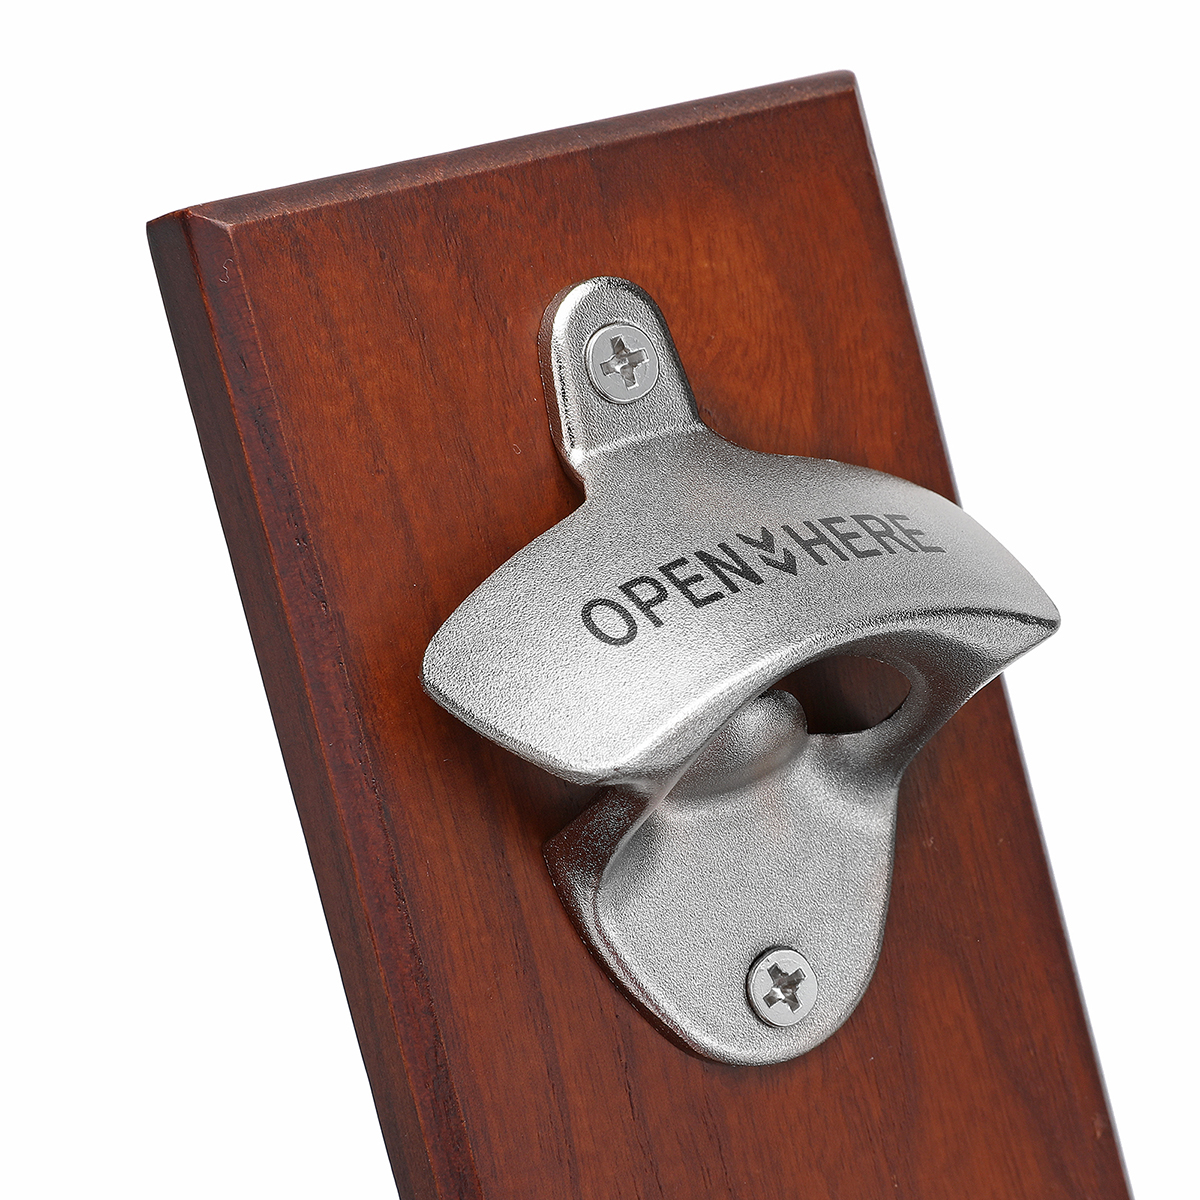 Wooden-Bottle-Opener-Wall-Mounted-Magnetic-Bottle-Openers-with-Cap-Catch-1964775-15